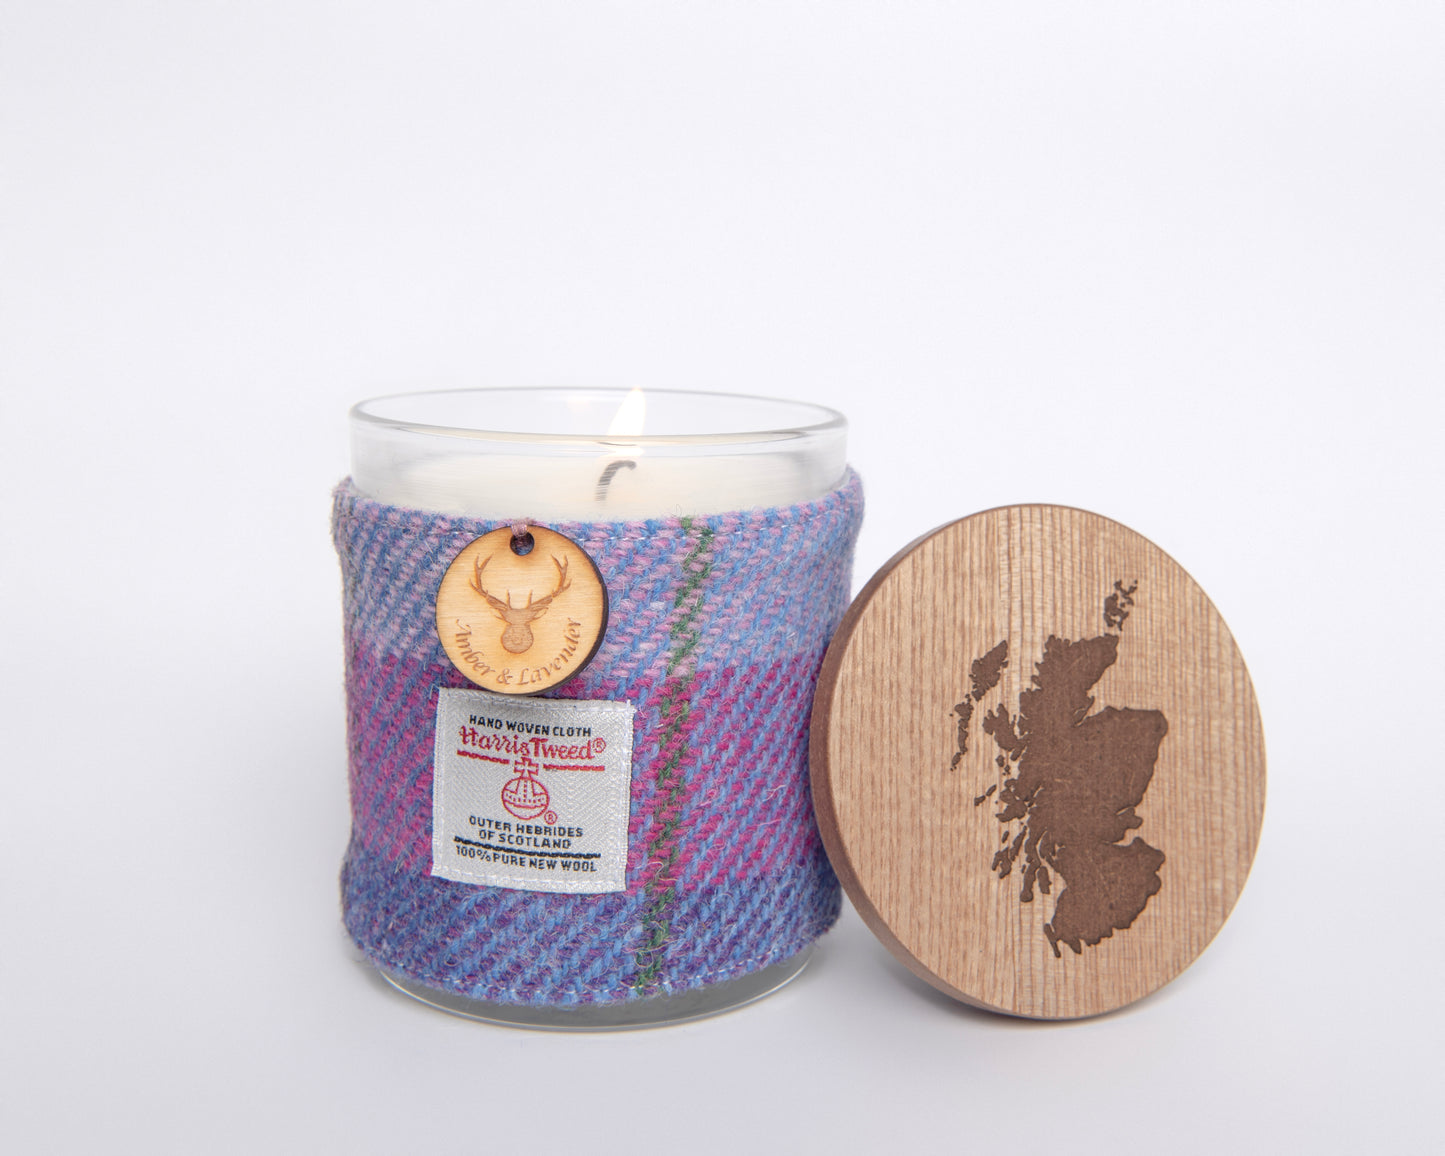 Amber & Lavender Soy Candle with Harris Tweed Sleeve